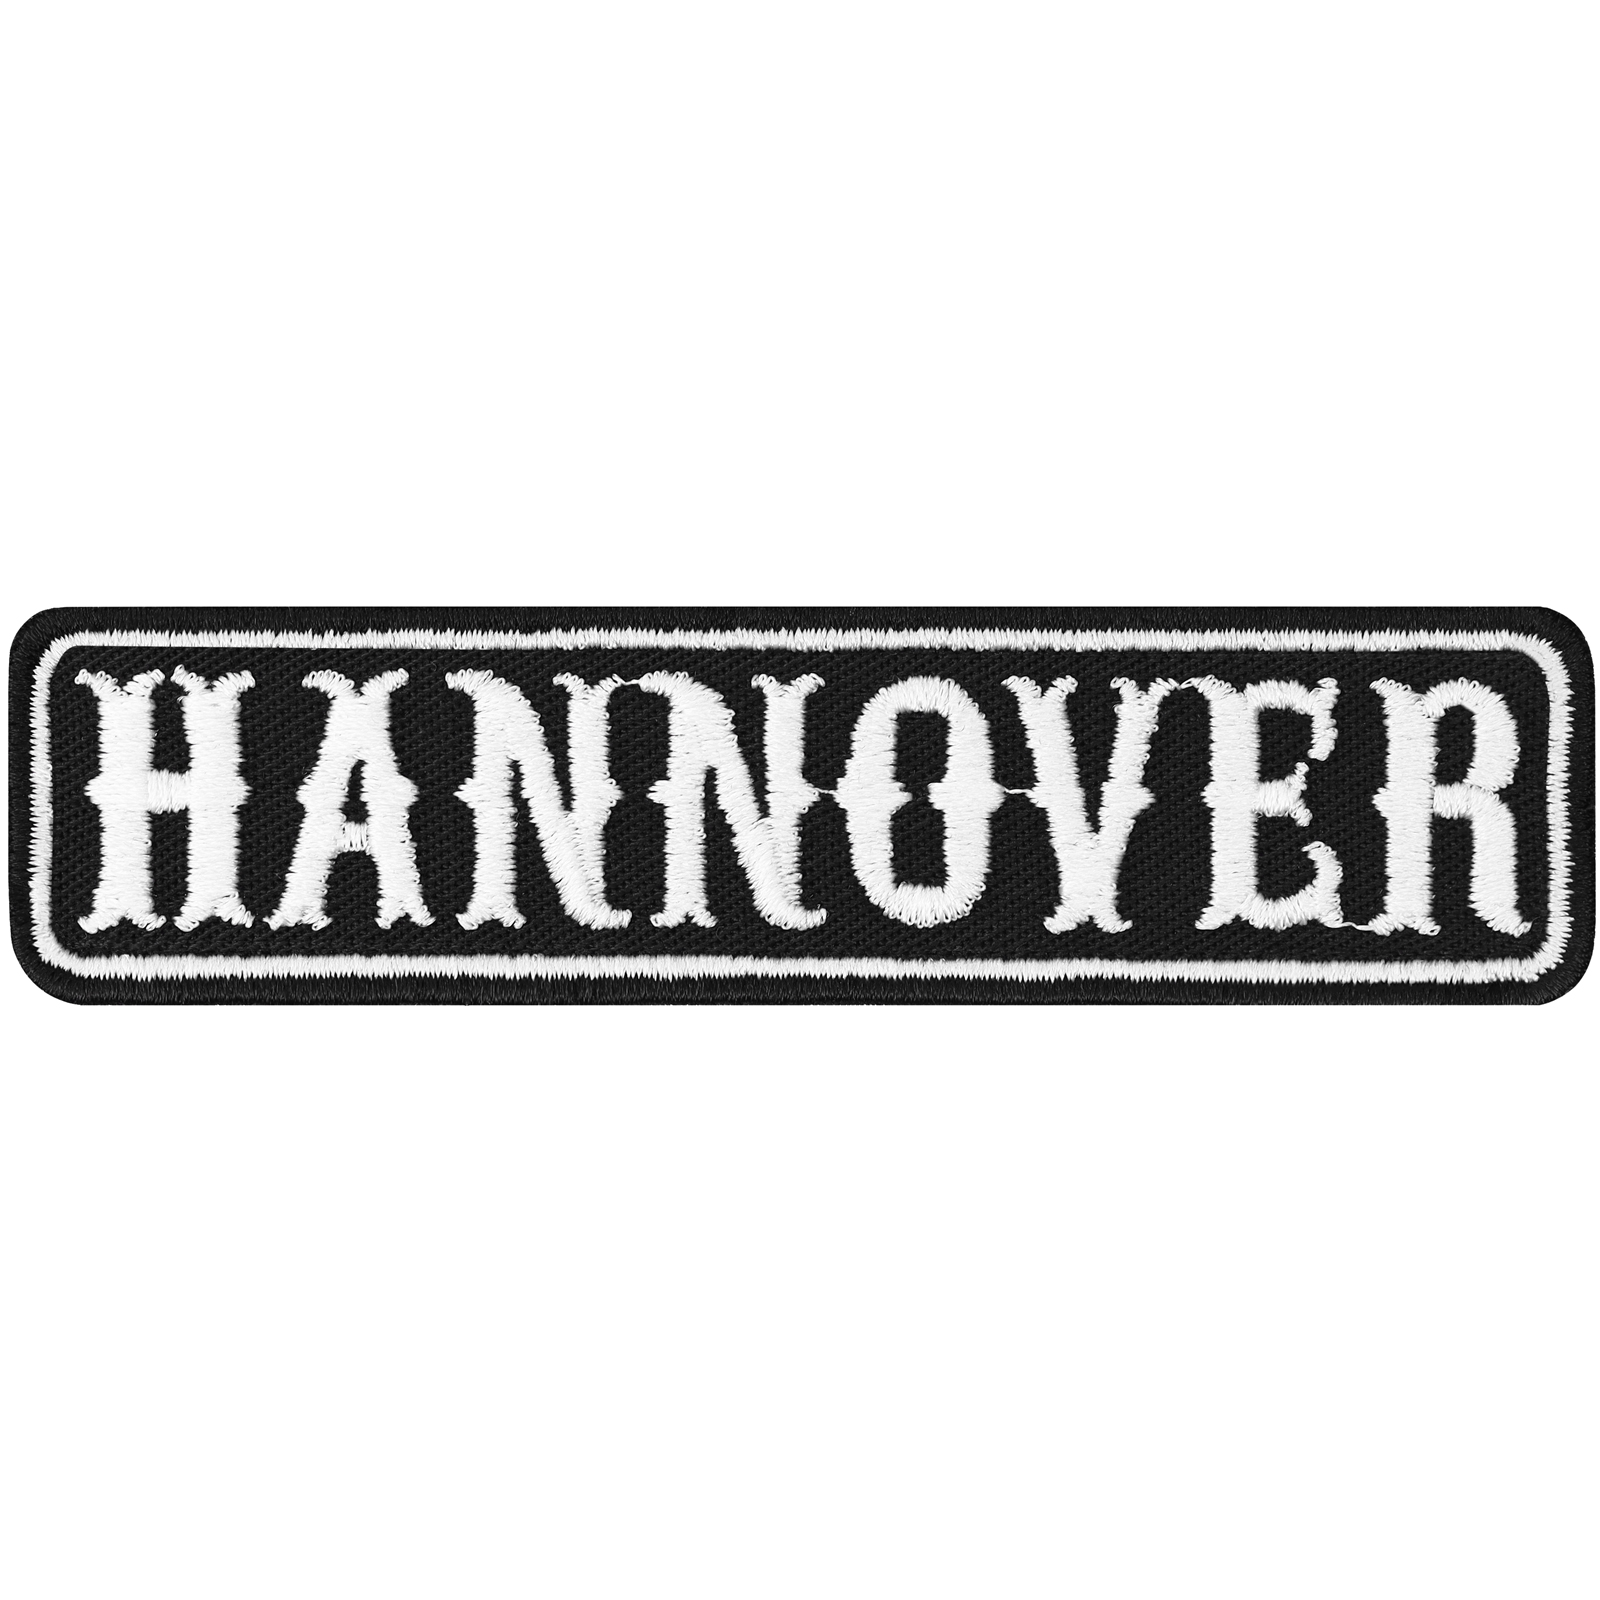 Hannover - Patch